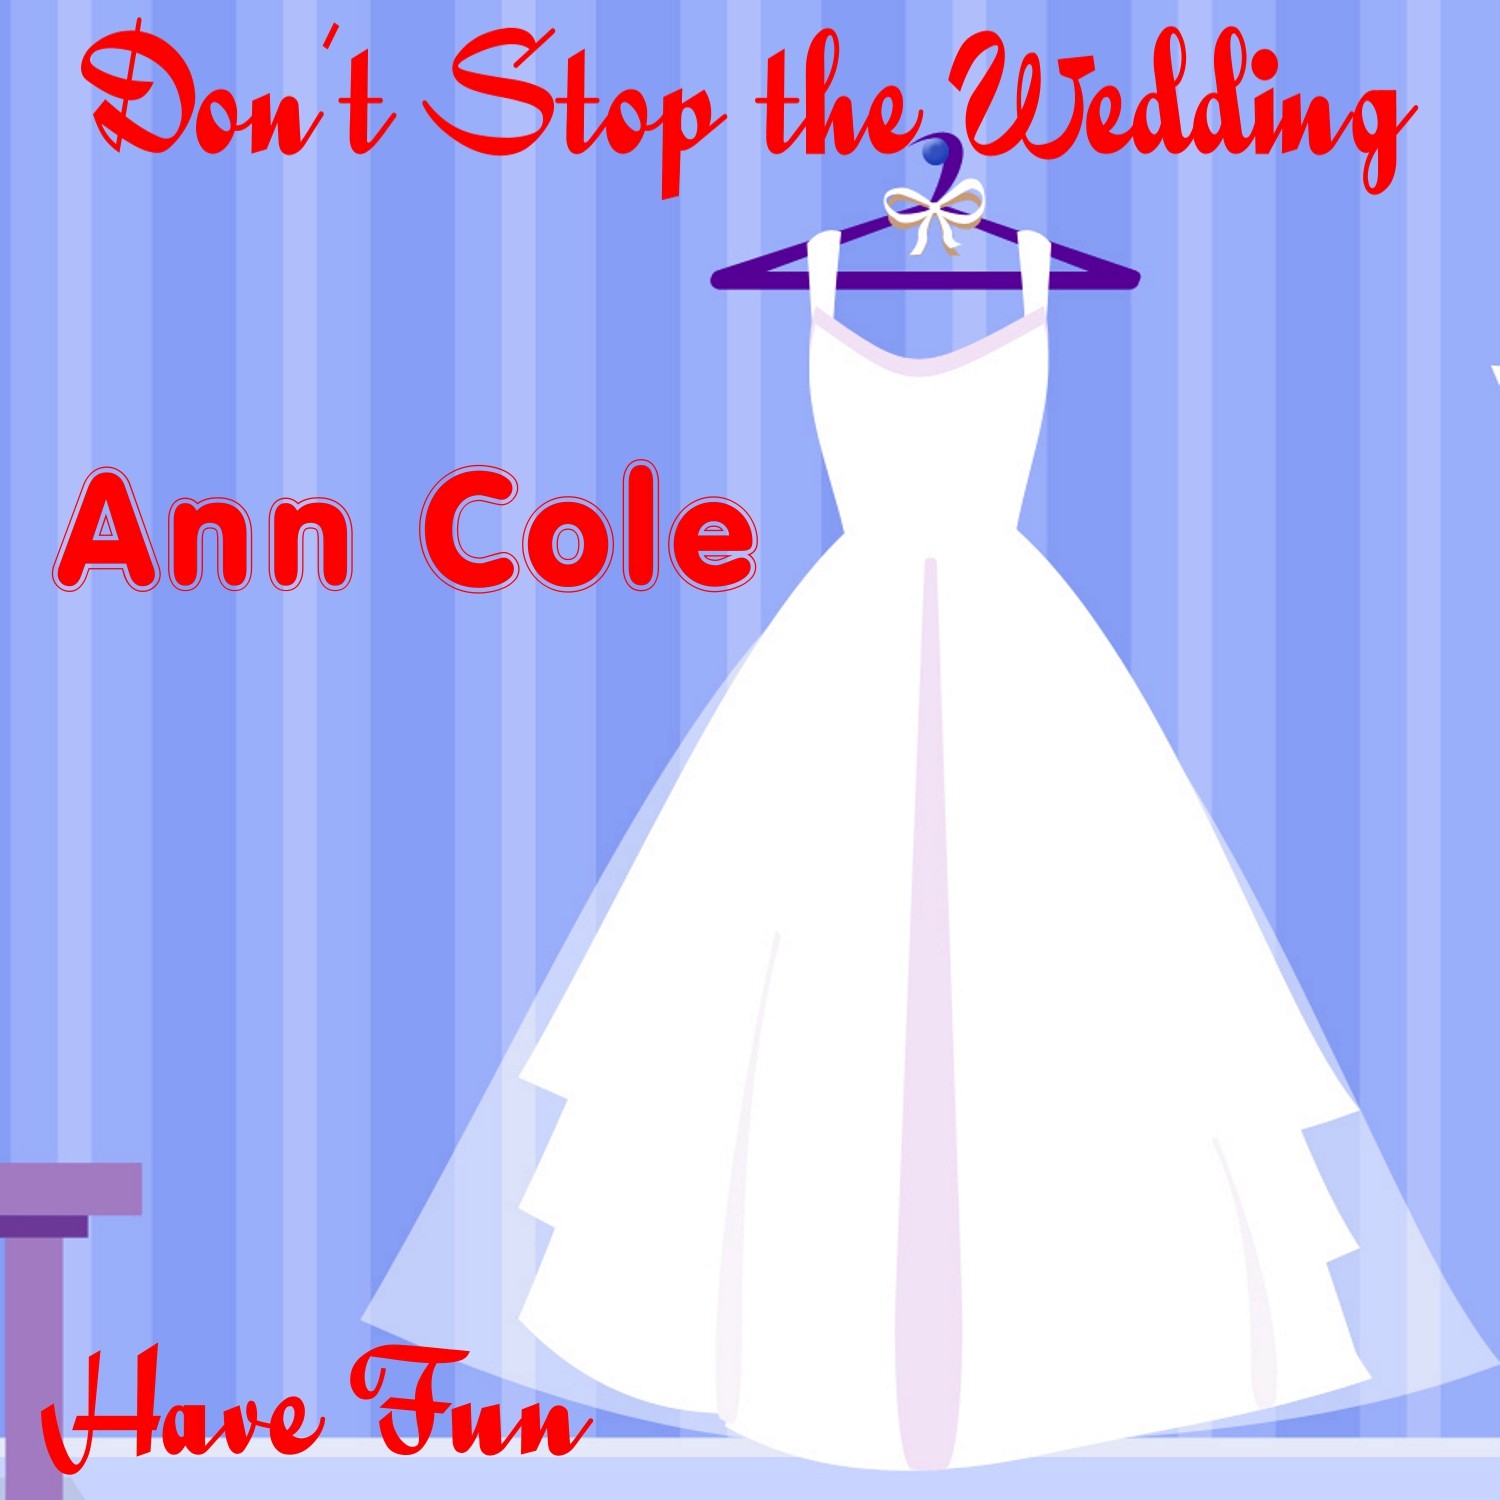 Don't Stop the Wedding